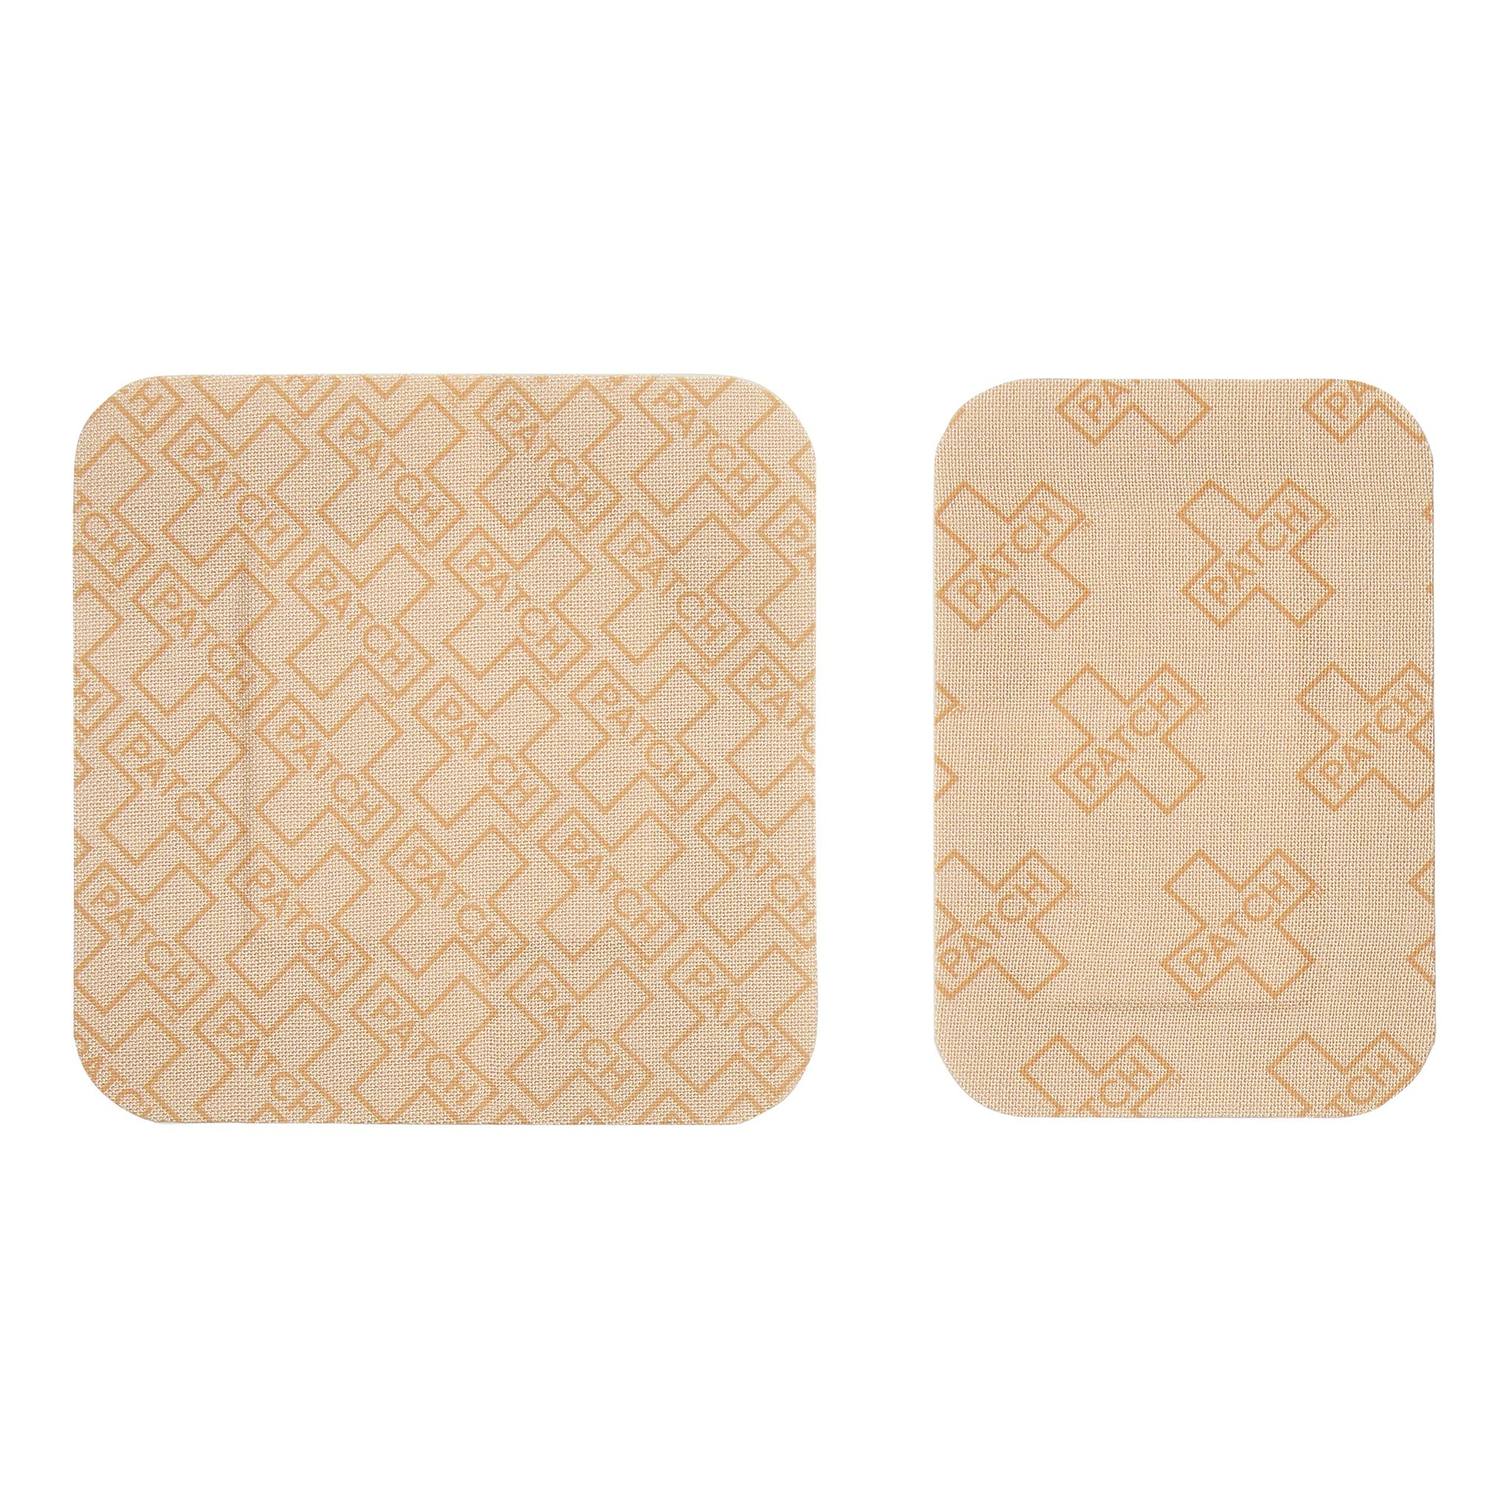 Patch | Natural Bamboo Bandages - Large Square and Rectangles - 10 pack